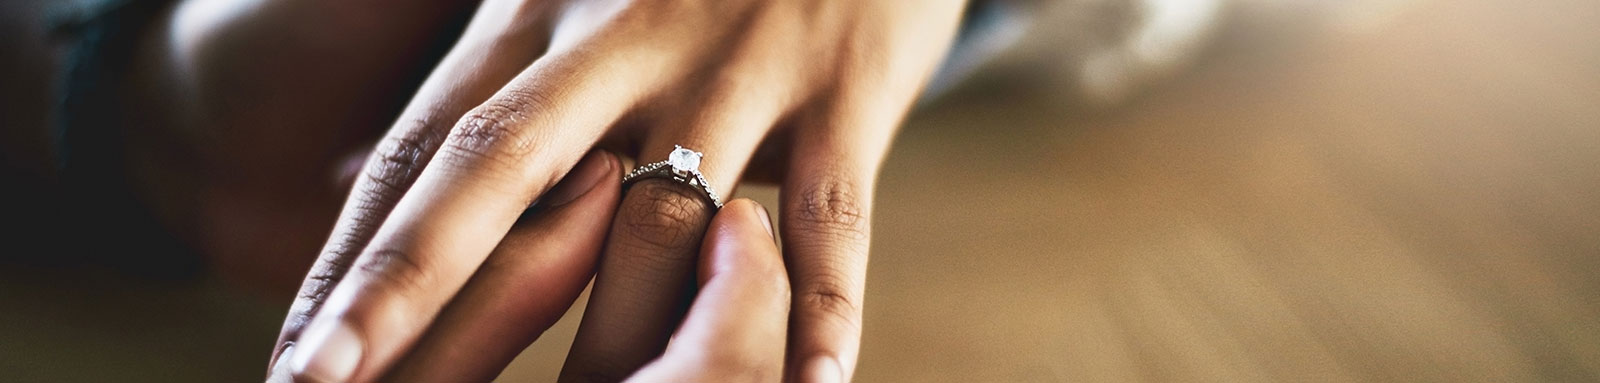 Placing an engagement ring on woman's finger